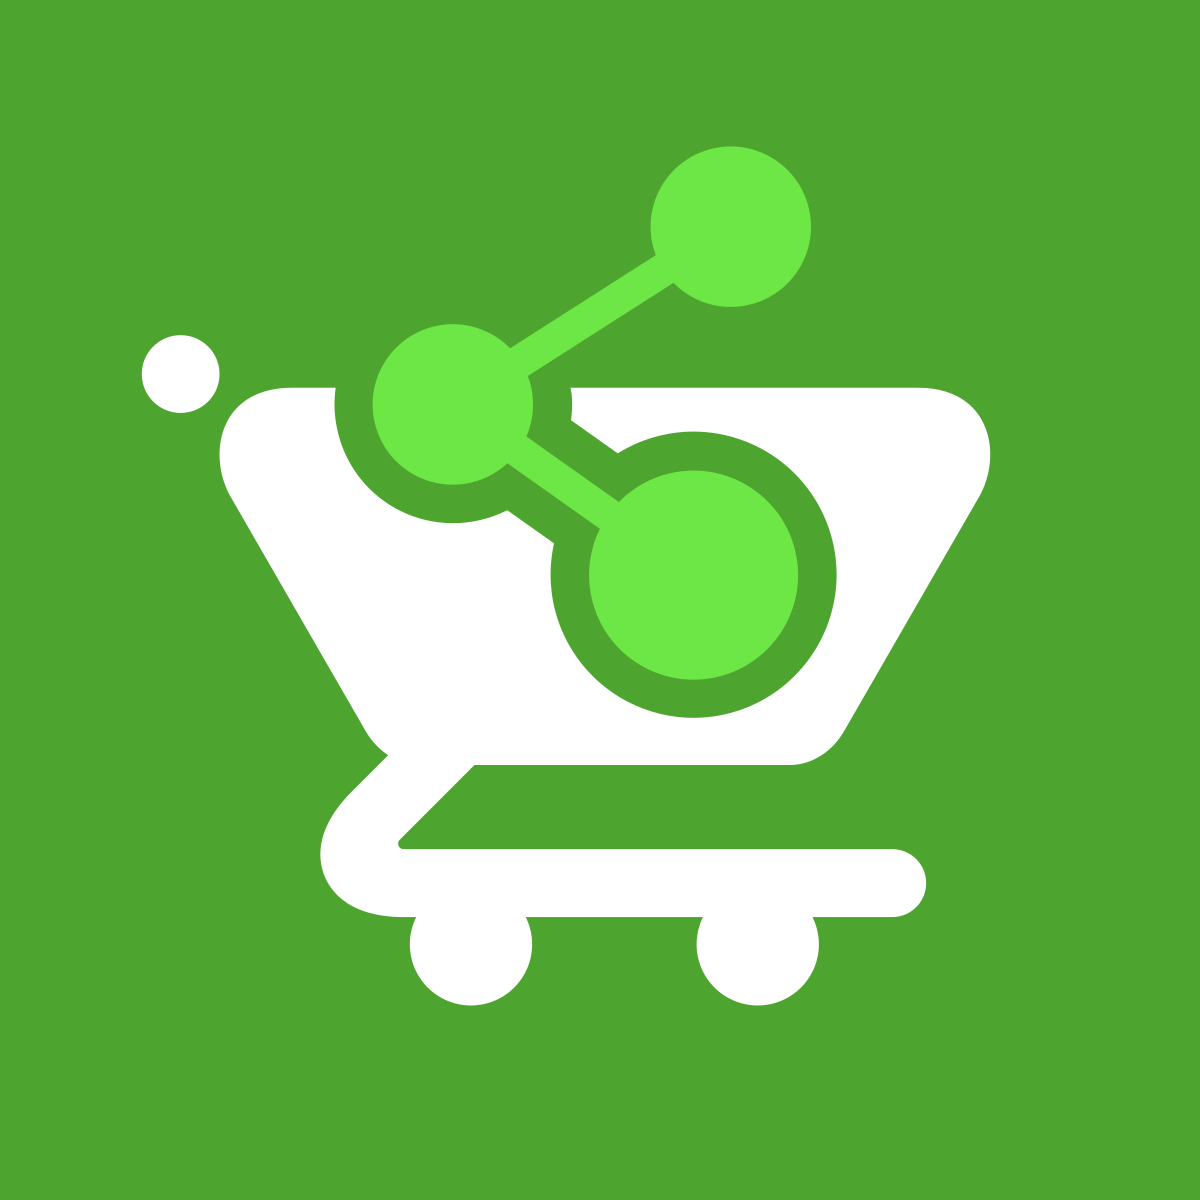 Hire Shopify Experts to integrate Keep & Share Your Cart app into a Shopify store